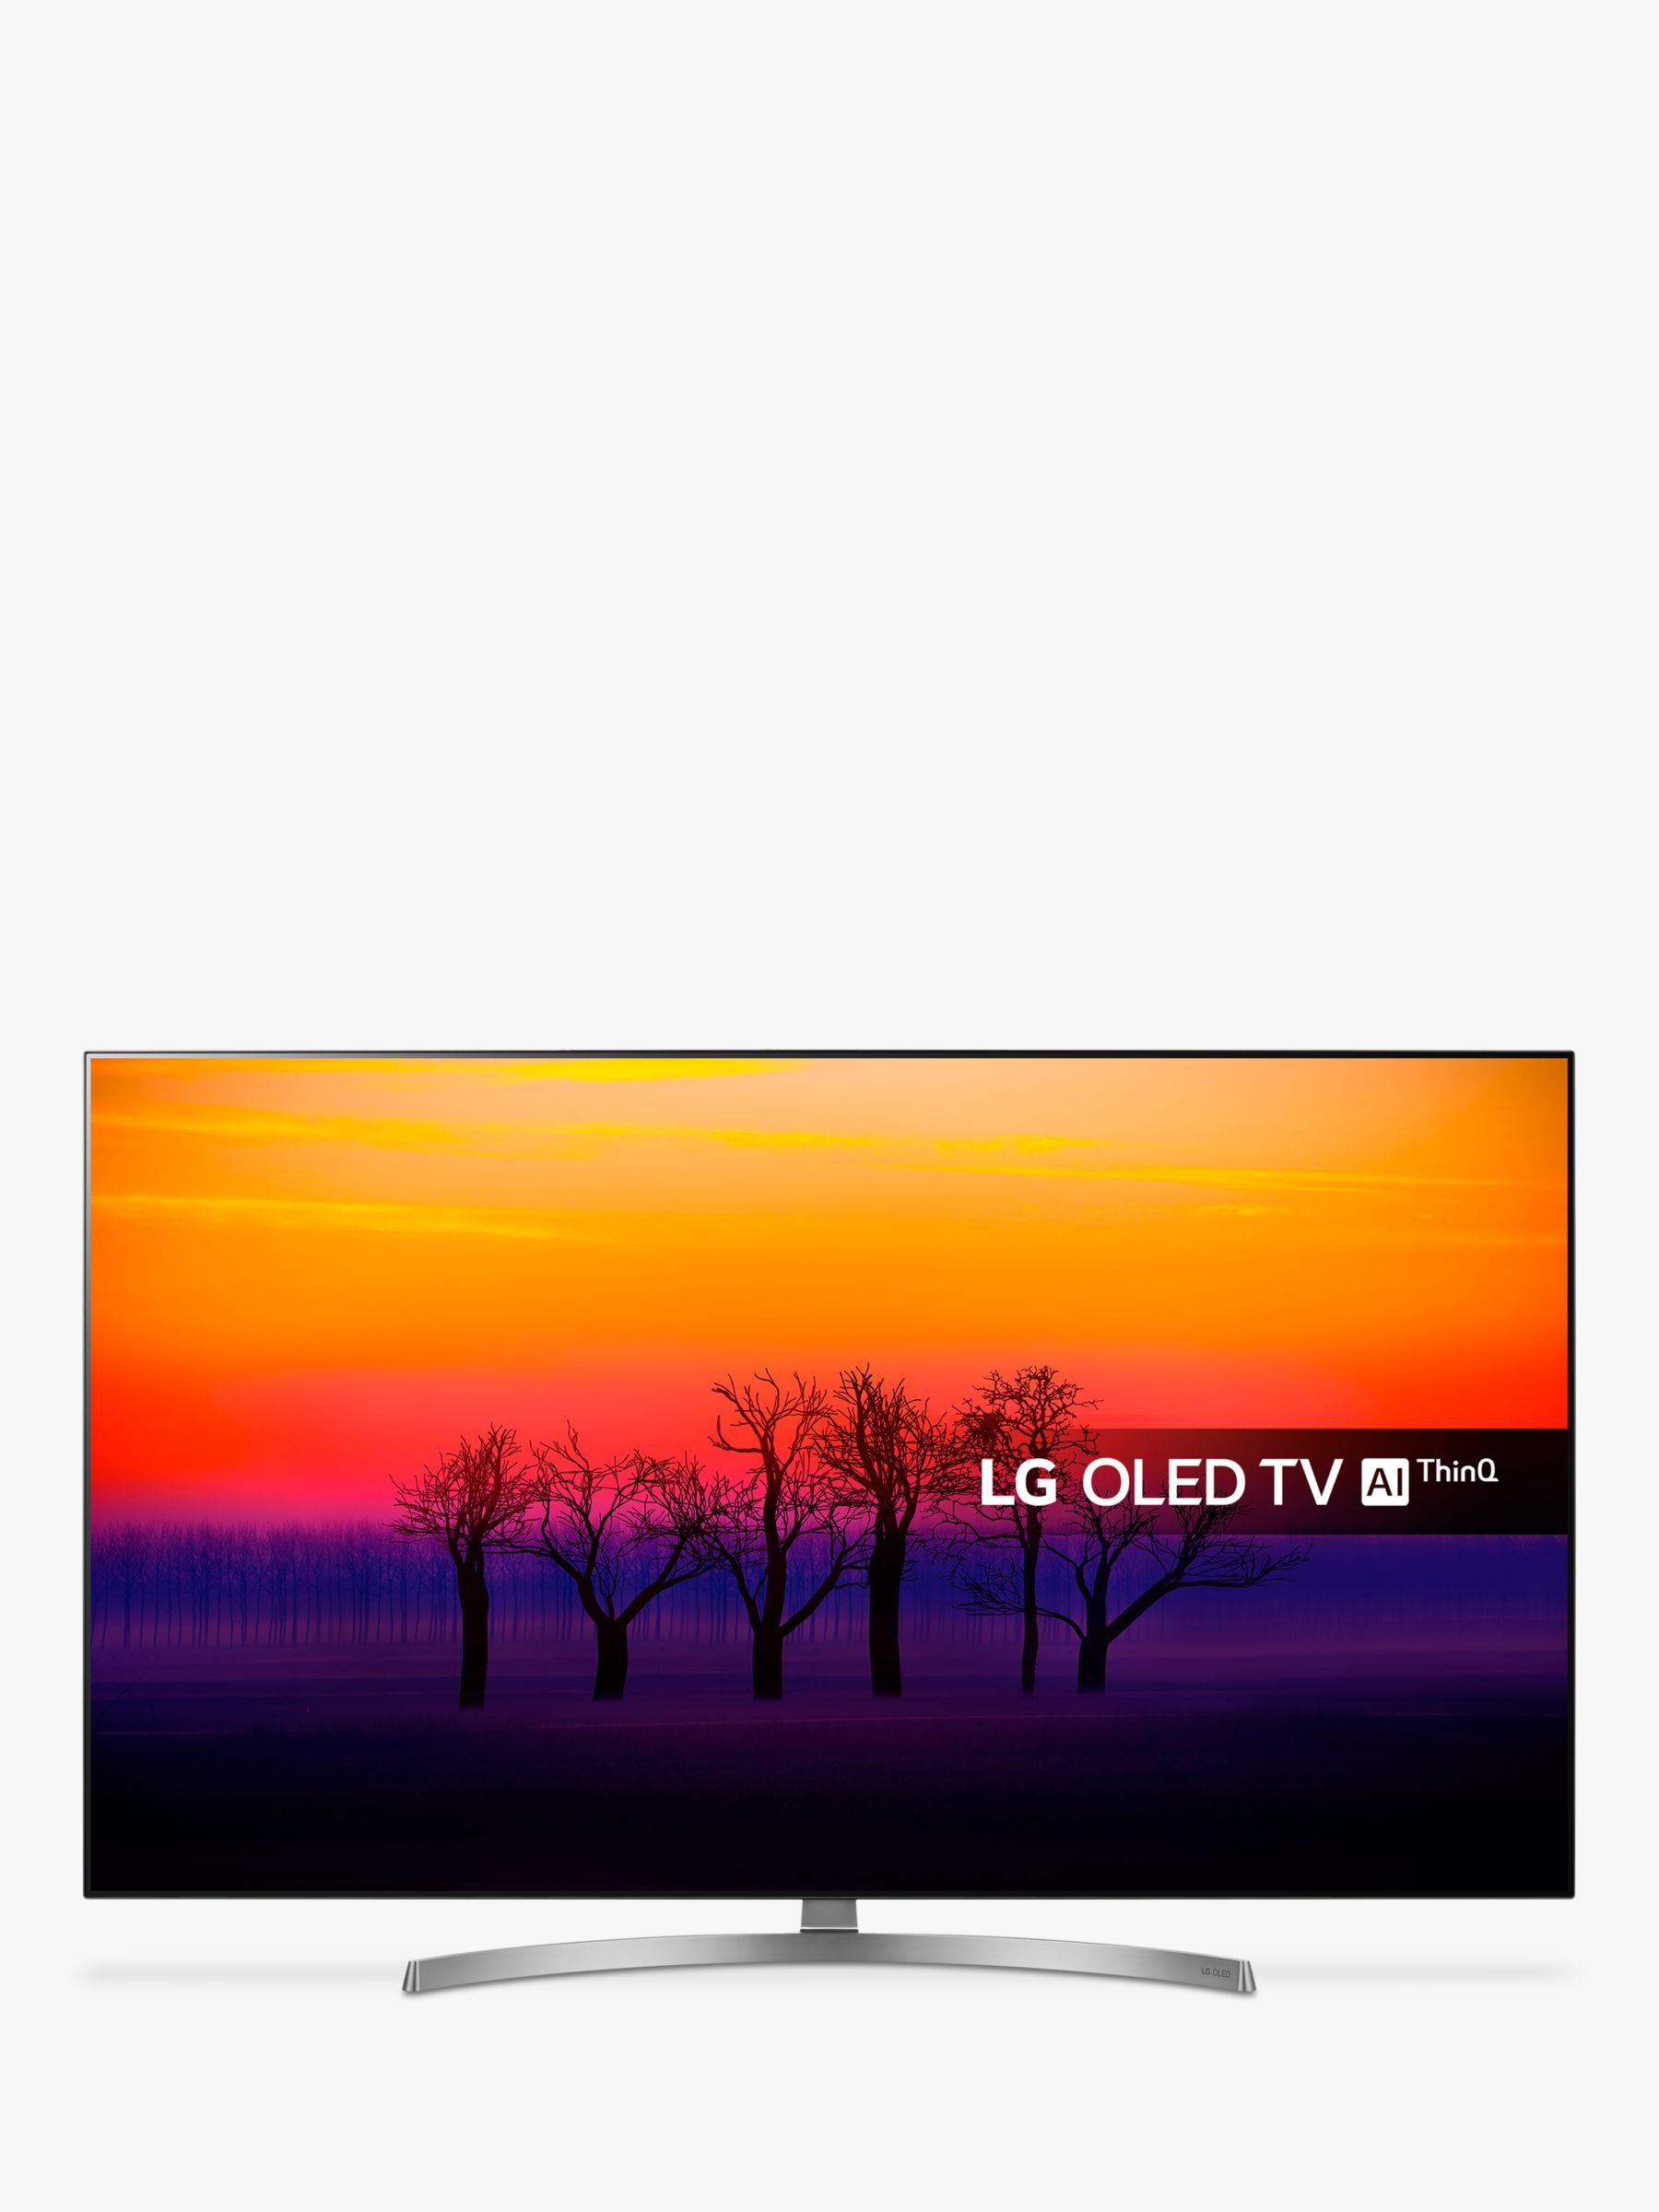 LG OLED55B8SLC OLED HDR 4K Ultra HD Smart TV, 55 with Freeview Play/Freesat HD, Dolby Atmos, Picture-On-Metal Design & Crescent Stand, Ultra HD Certified, Black & Silver